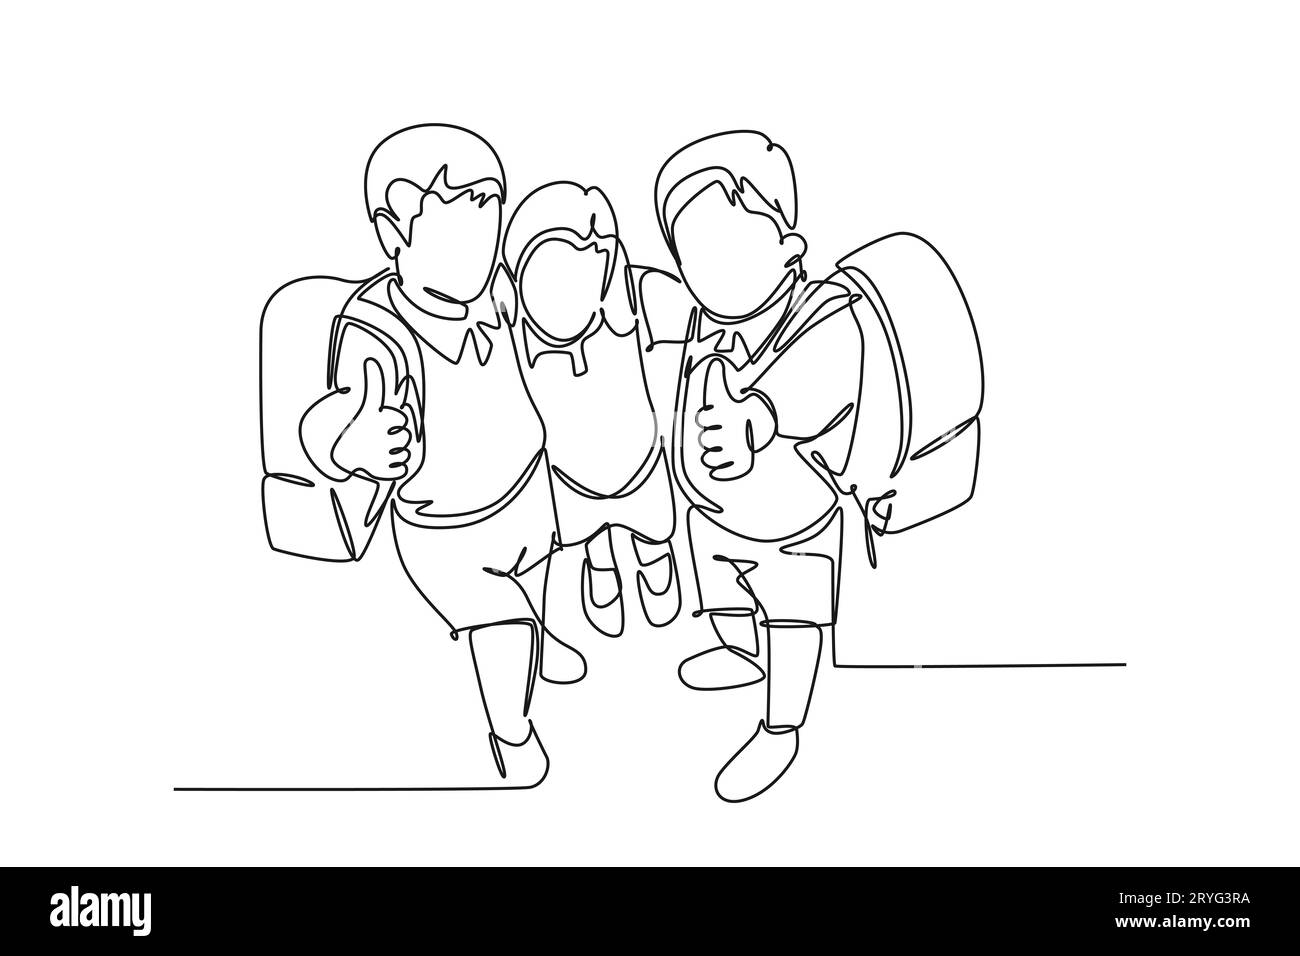 Single continuous line drawing group of happy boy and girl elementary school student carrying school bag and giving thumbs up gesture. Kids education. Stock Photo